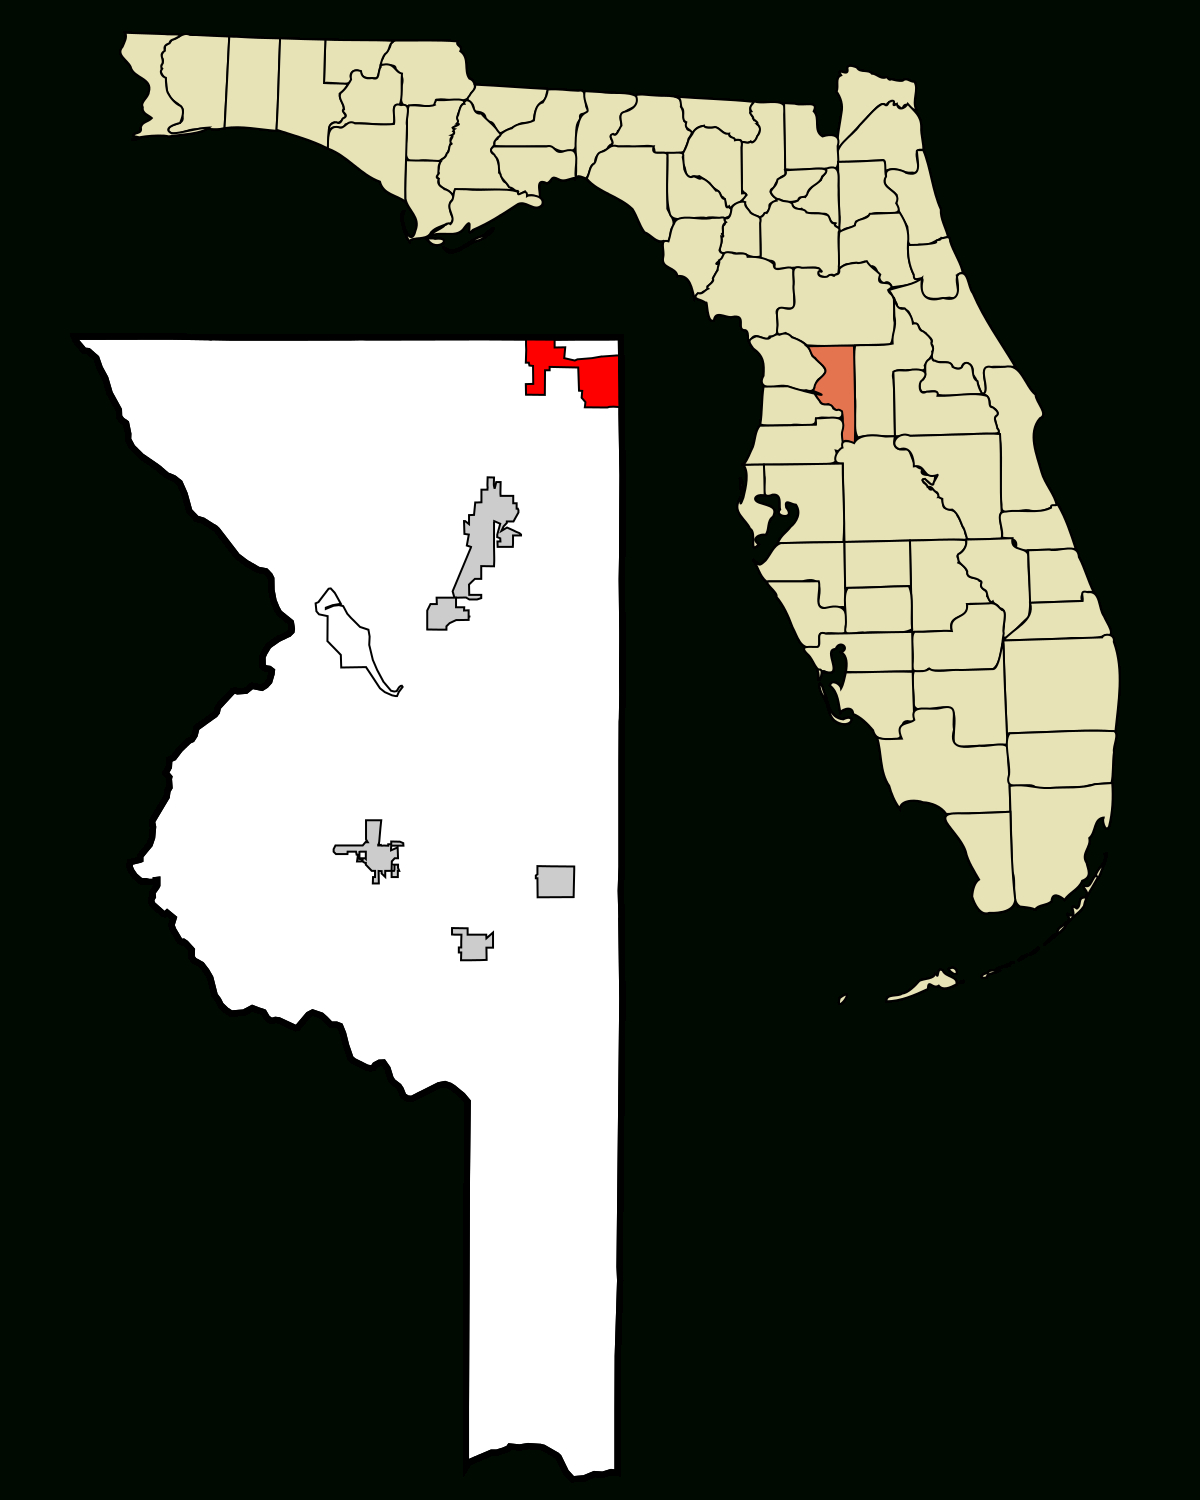 The Villages, Florida - Wikipedia - The Villages Florida Map